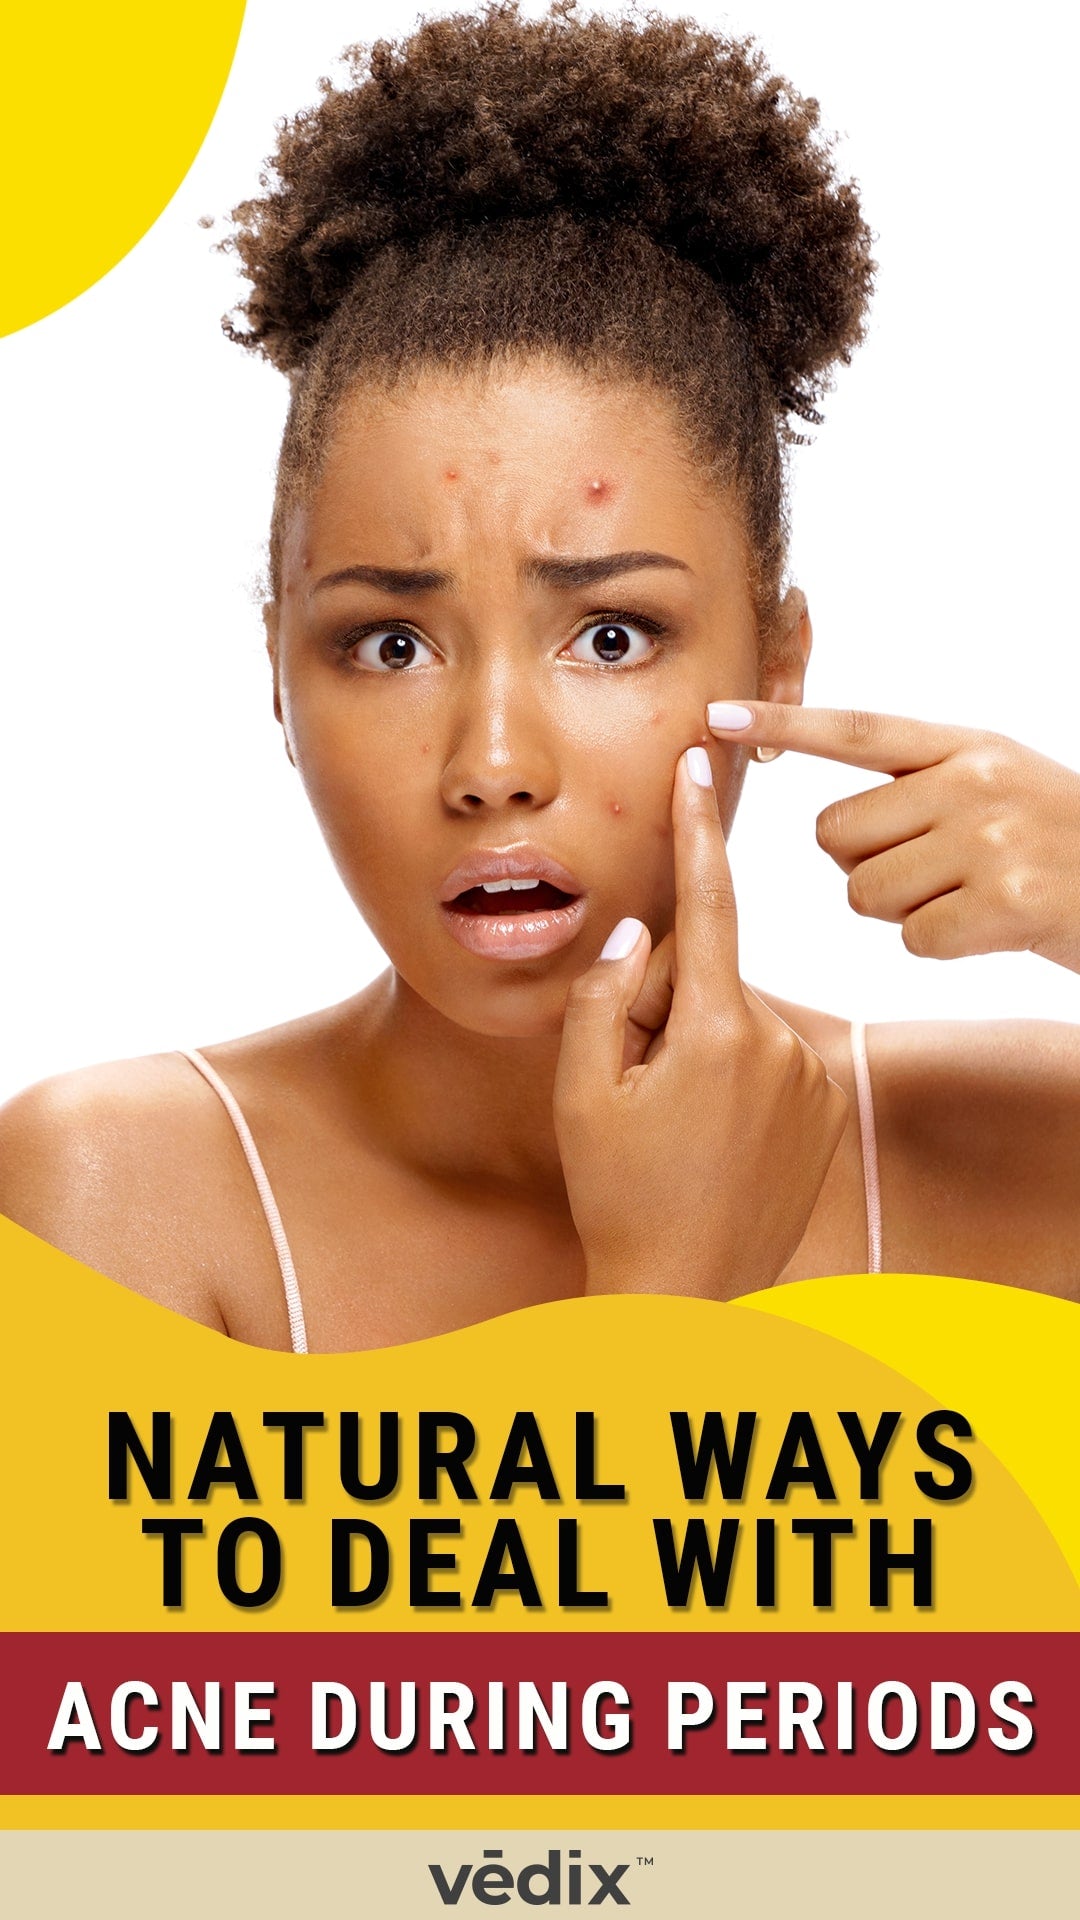 Ayurvedic Approach To Treat Period Acne